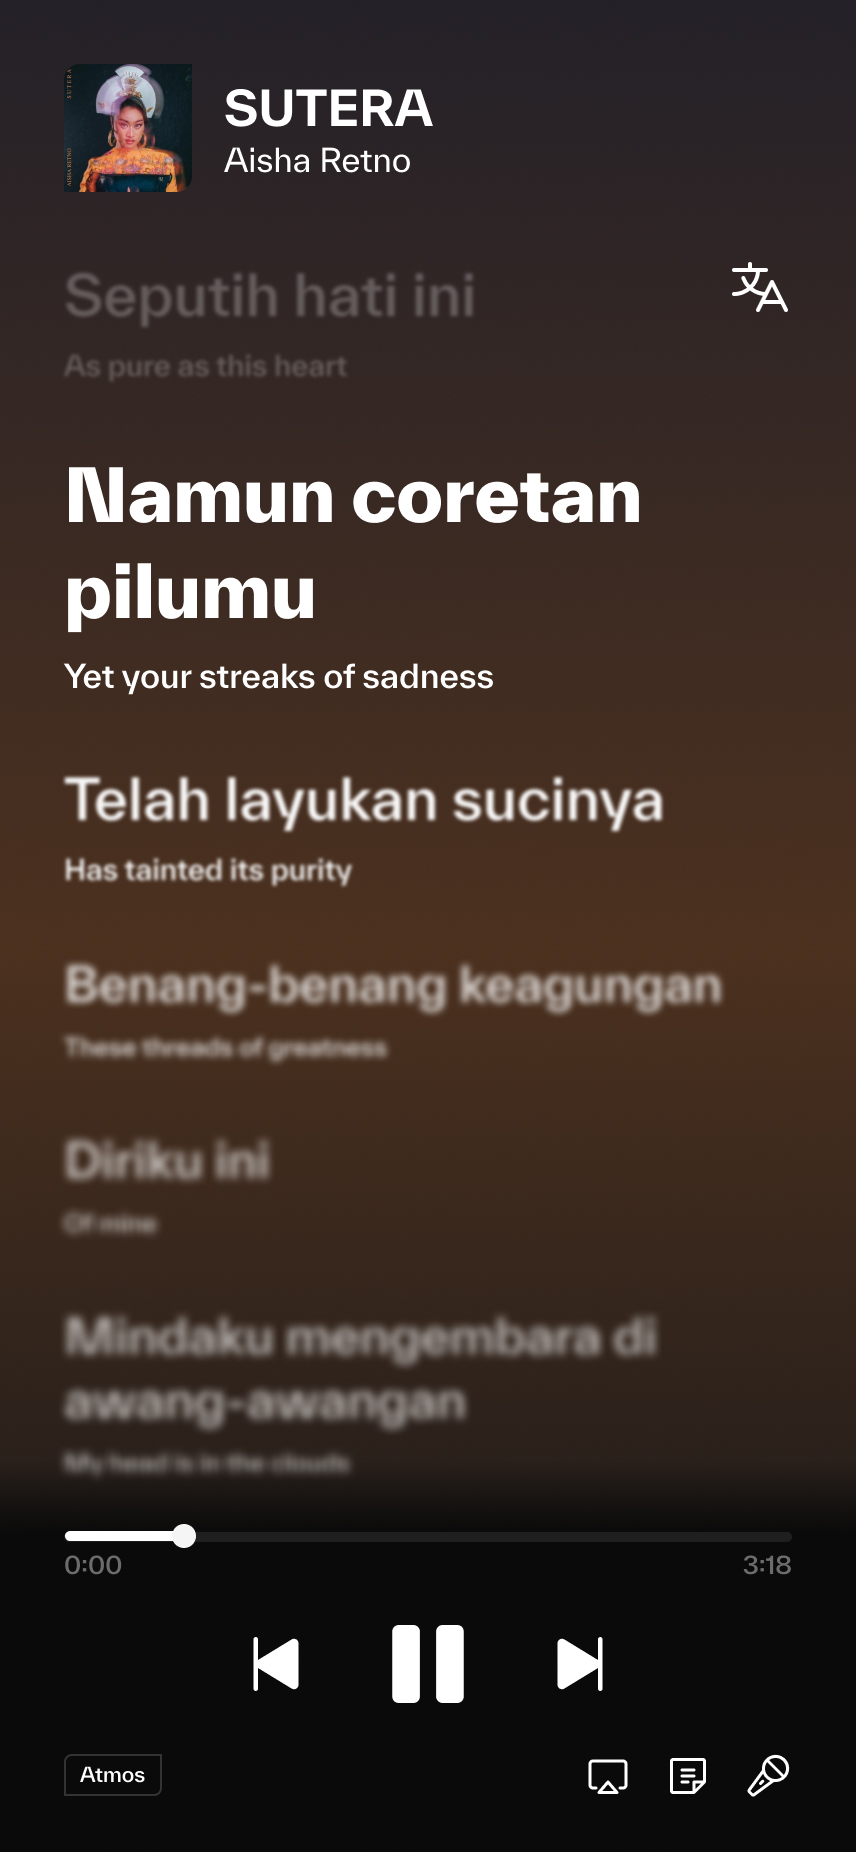 The lyrics screen, with translations converting the source language to English.